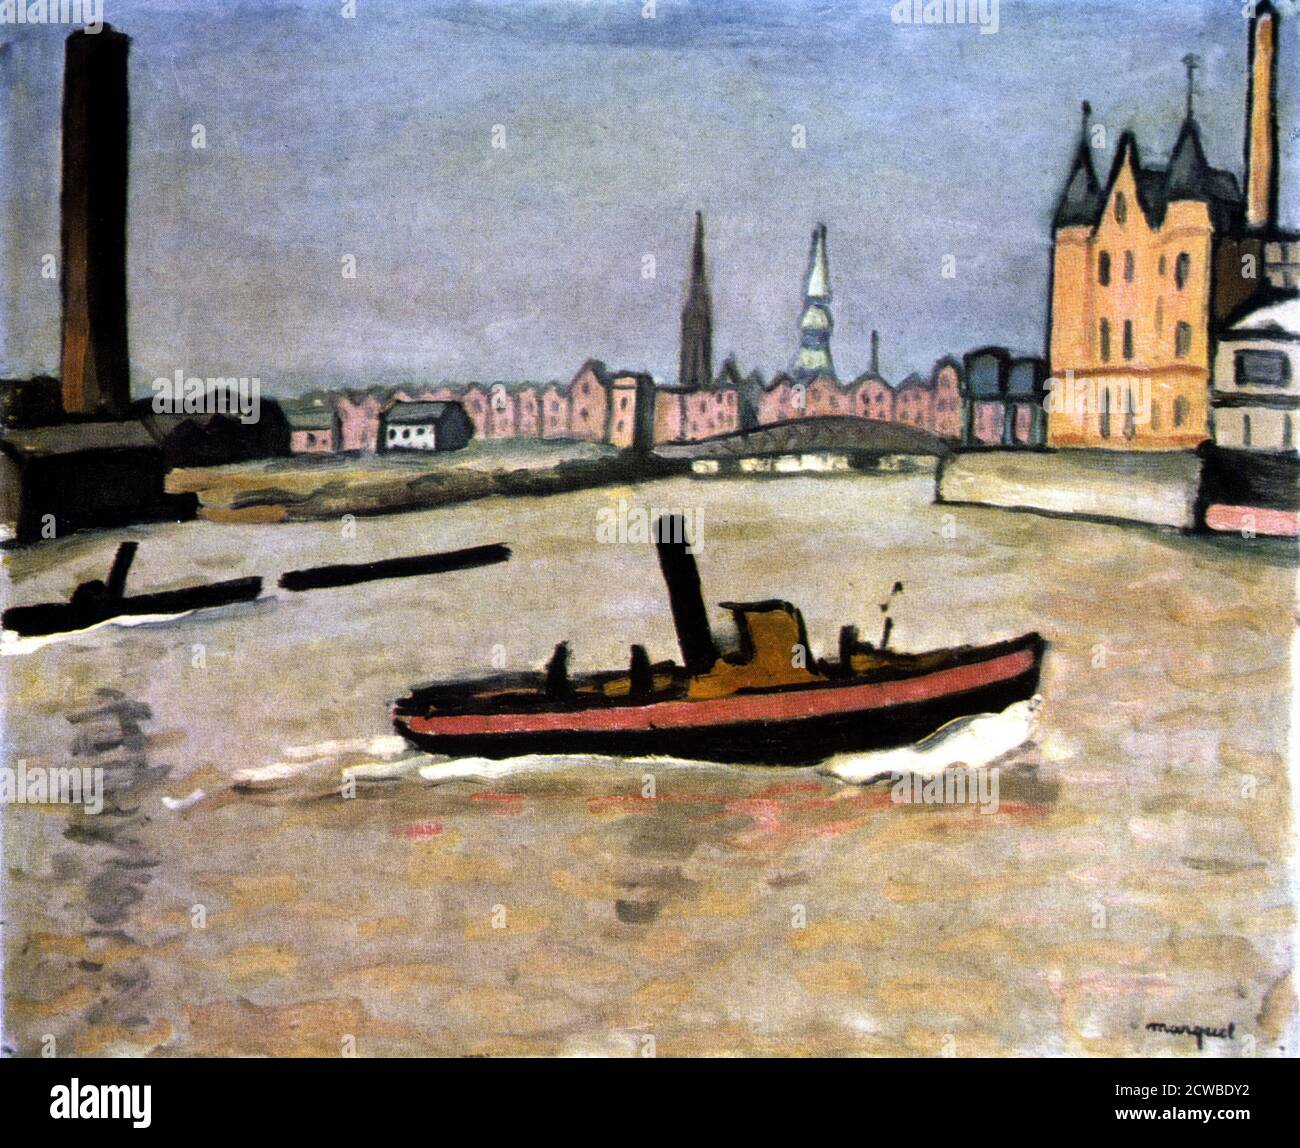 The Port of Hamburg', 1909 Artist: Albert Marquet. Albert Marquet(1875-1947) was born in Bordeaux, France. He was both very young and very poor when he went to Paris to study at the School of Decorative Arts under Gustave Moreau. Stock Photo